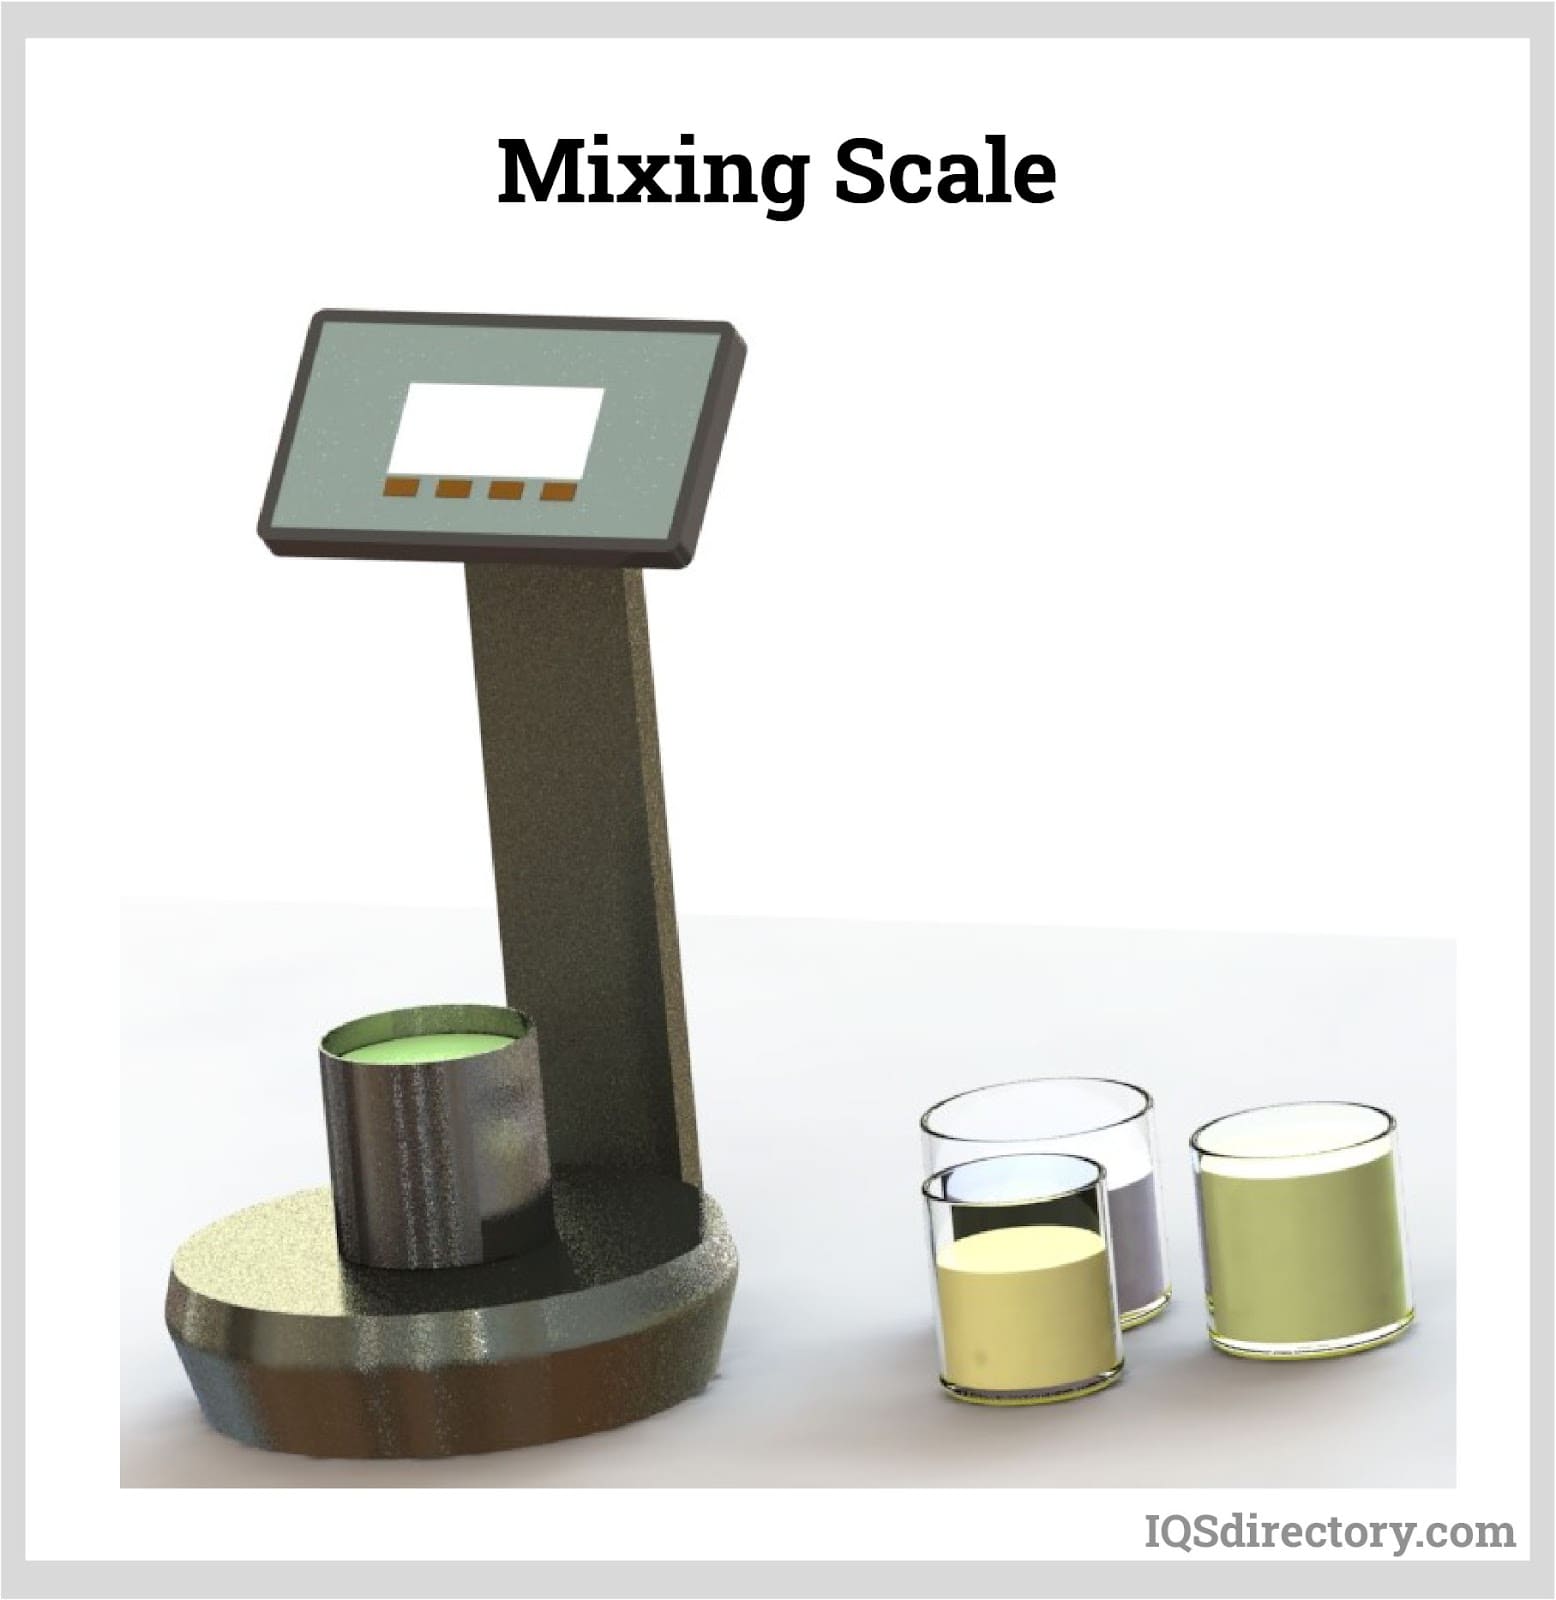 Platform Scale: What Is It? How Is It Used? Types Of